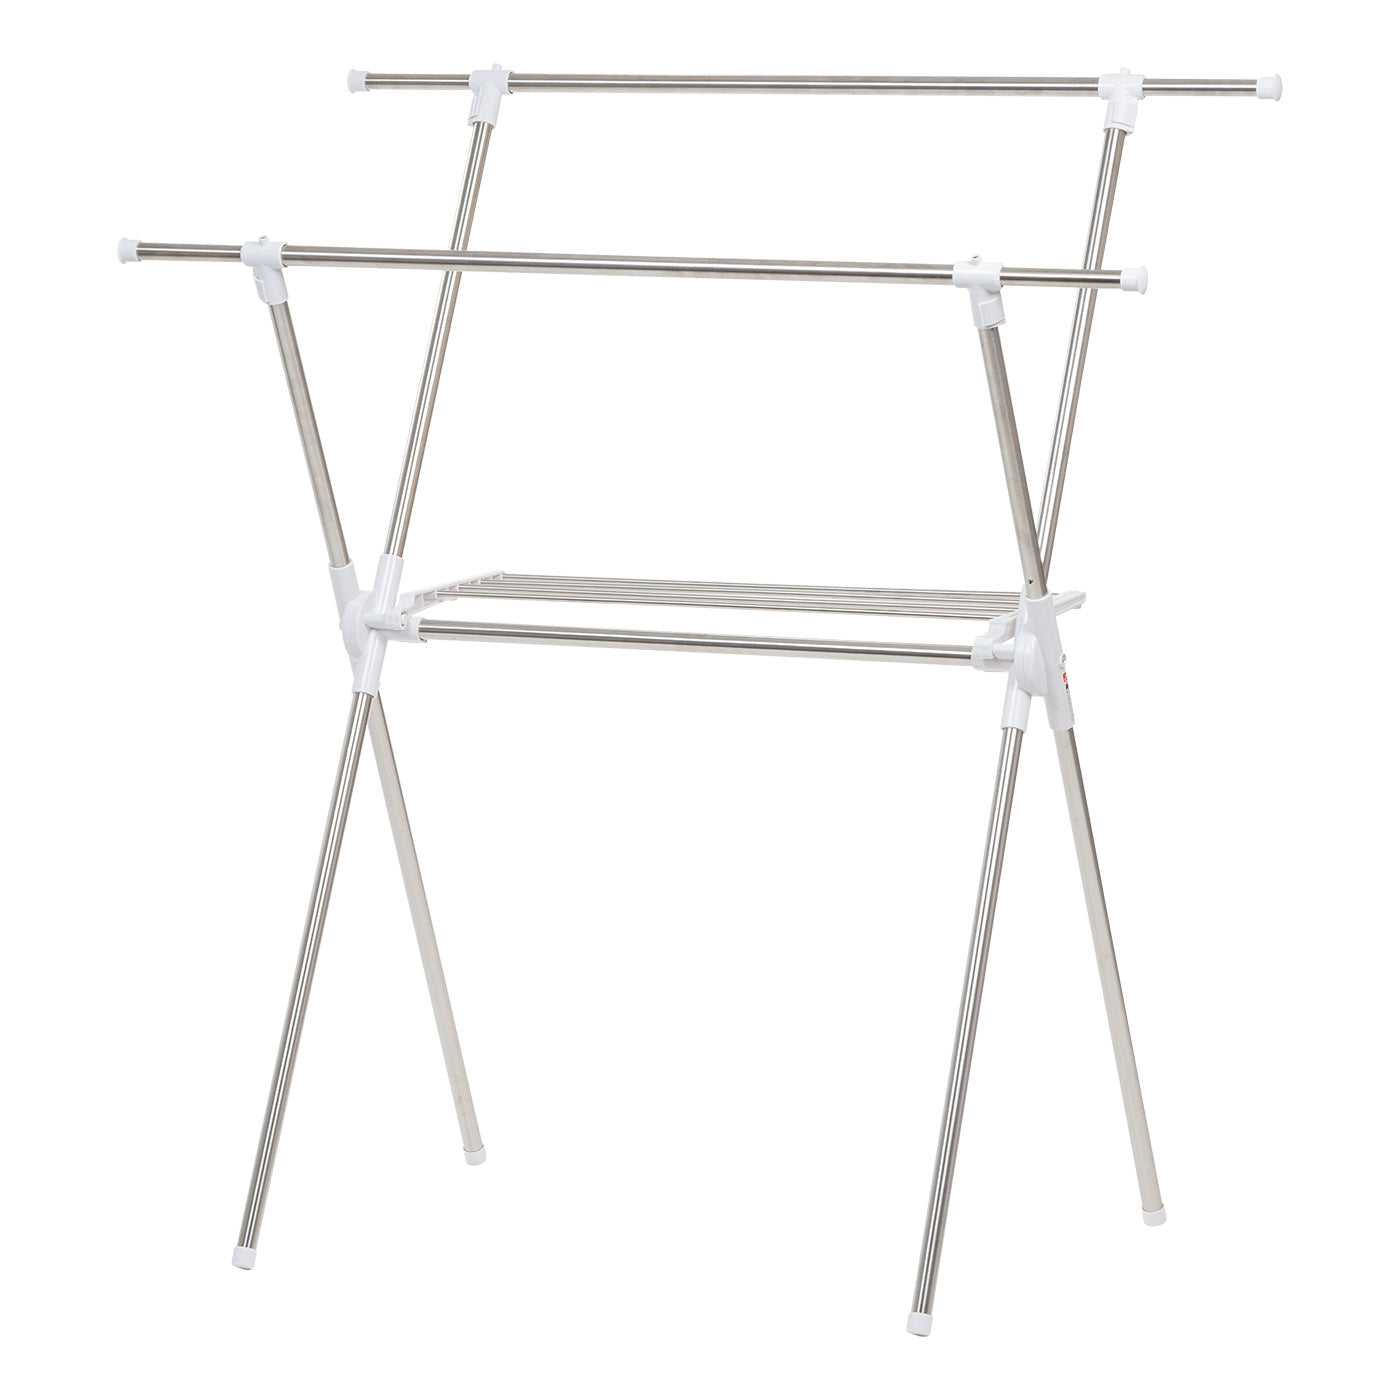 Iris USA Foldable Clothes Drying Rack with Extendable Rods for Large Laundry Loads